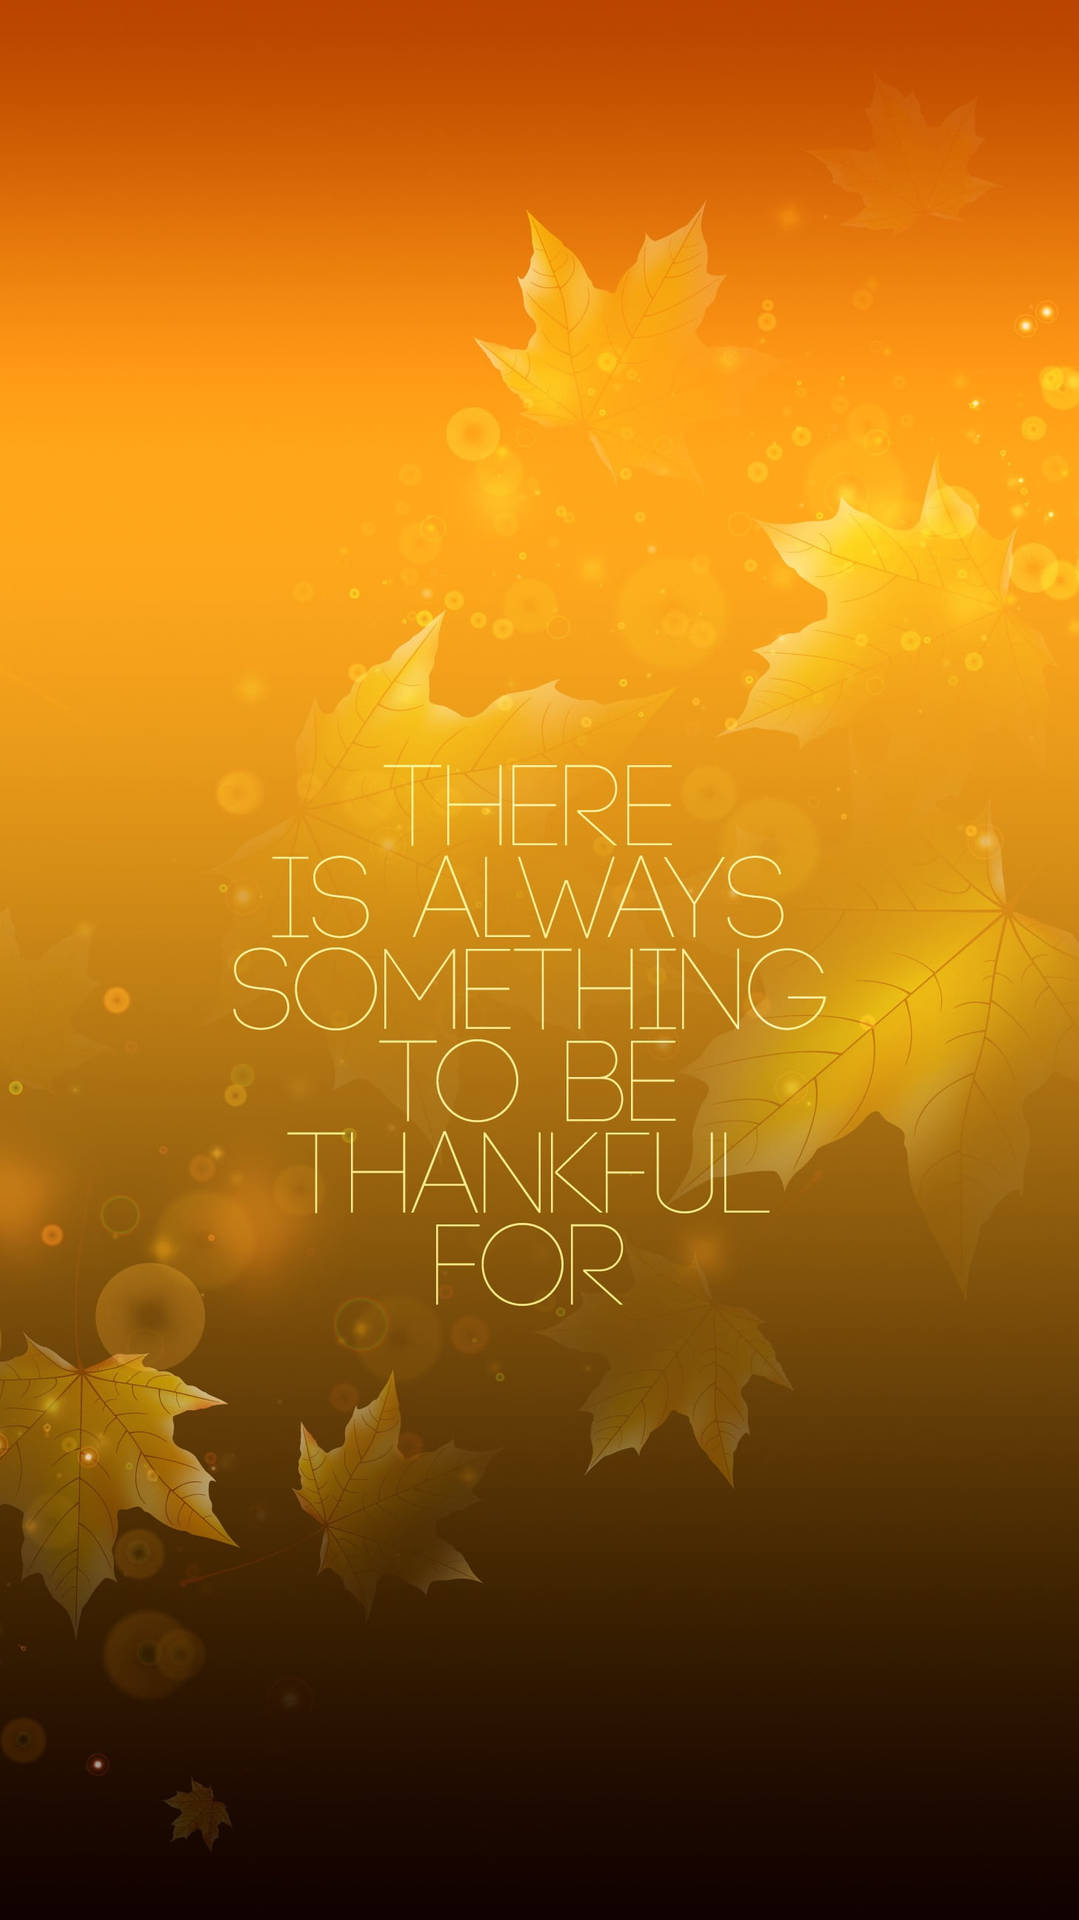 Thanksgiving Greeting On Gradient Iphone Wallpaper